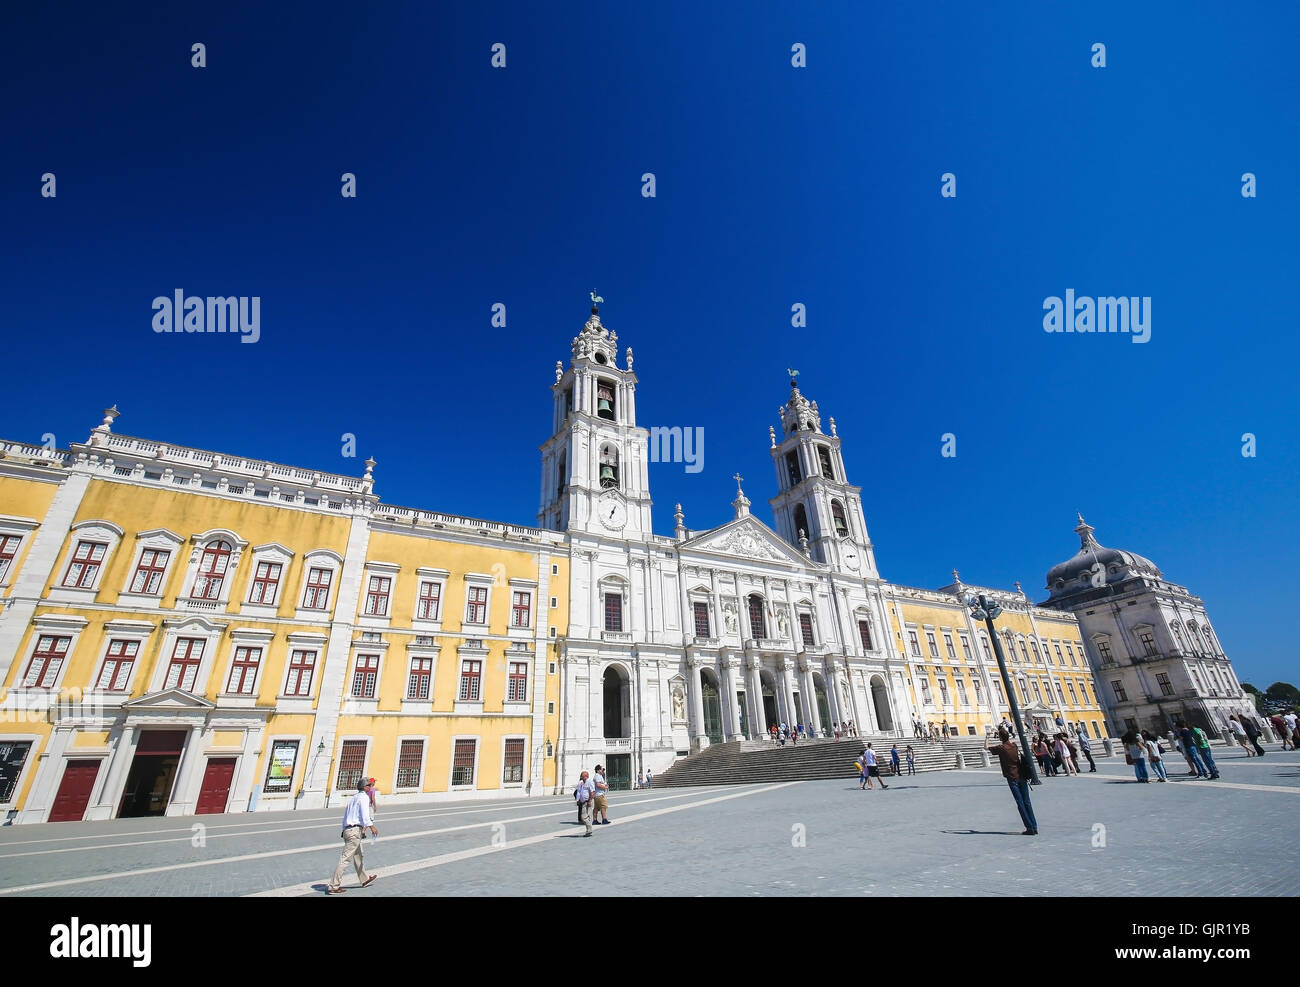 MAFRA, PORTUGAL - JULY 17, 2016: Facade of the Basilica at the Palace of Mafra, Portugal, a famous royal palace built in the 18t Stock Photo